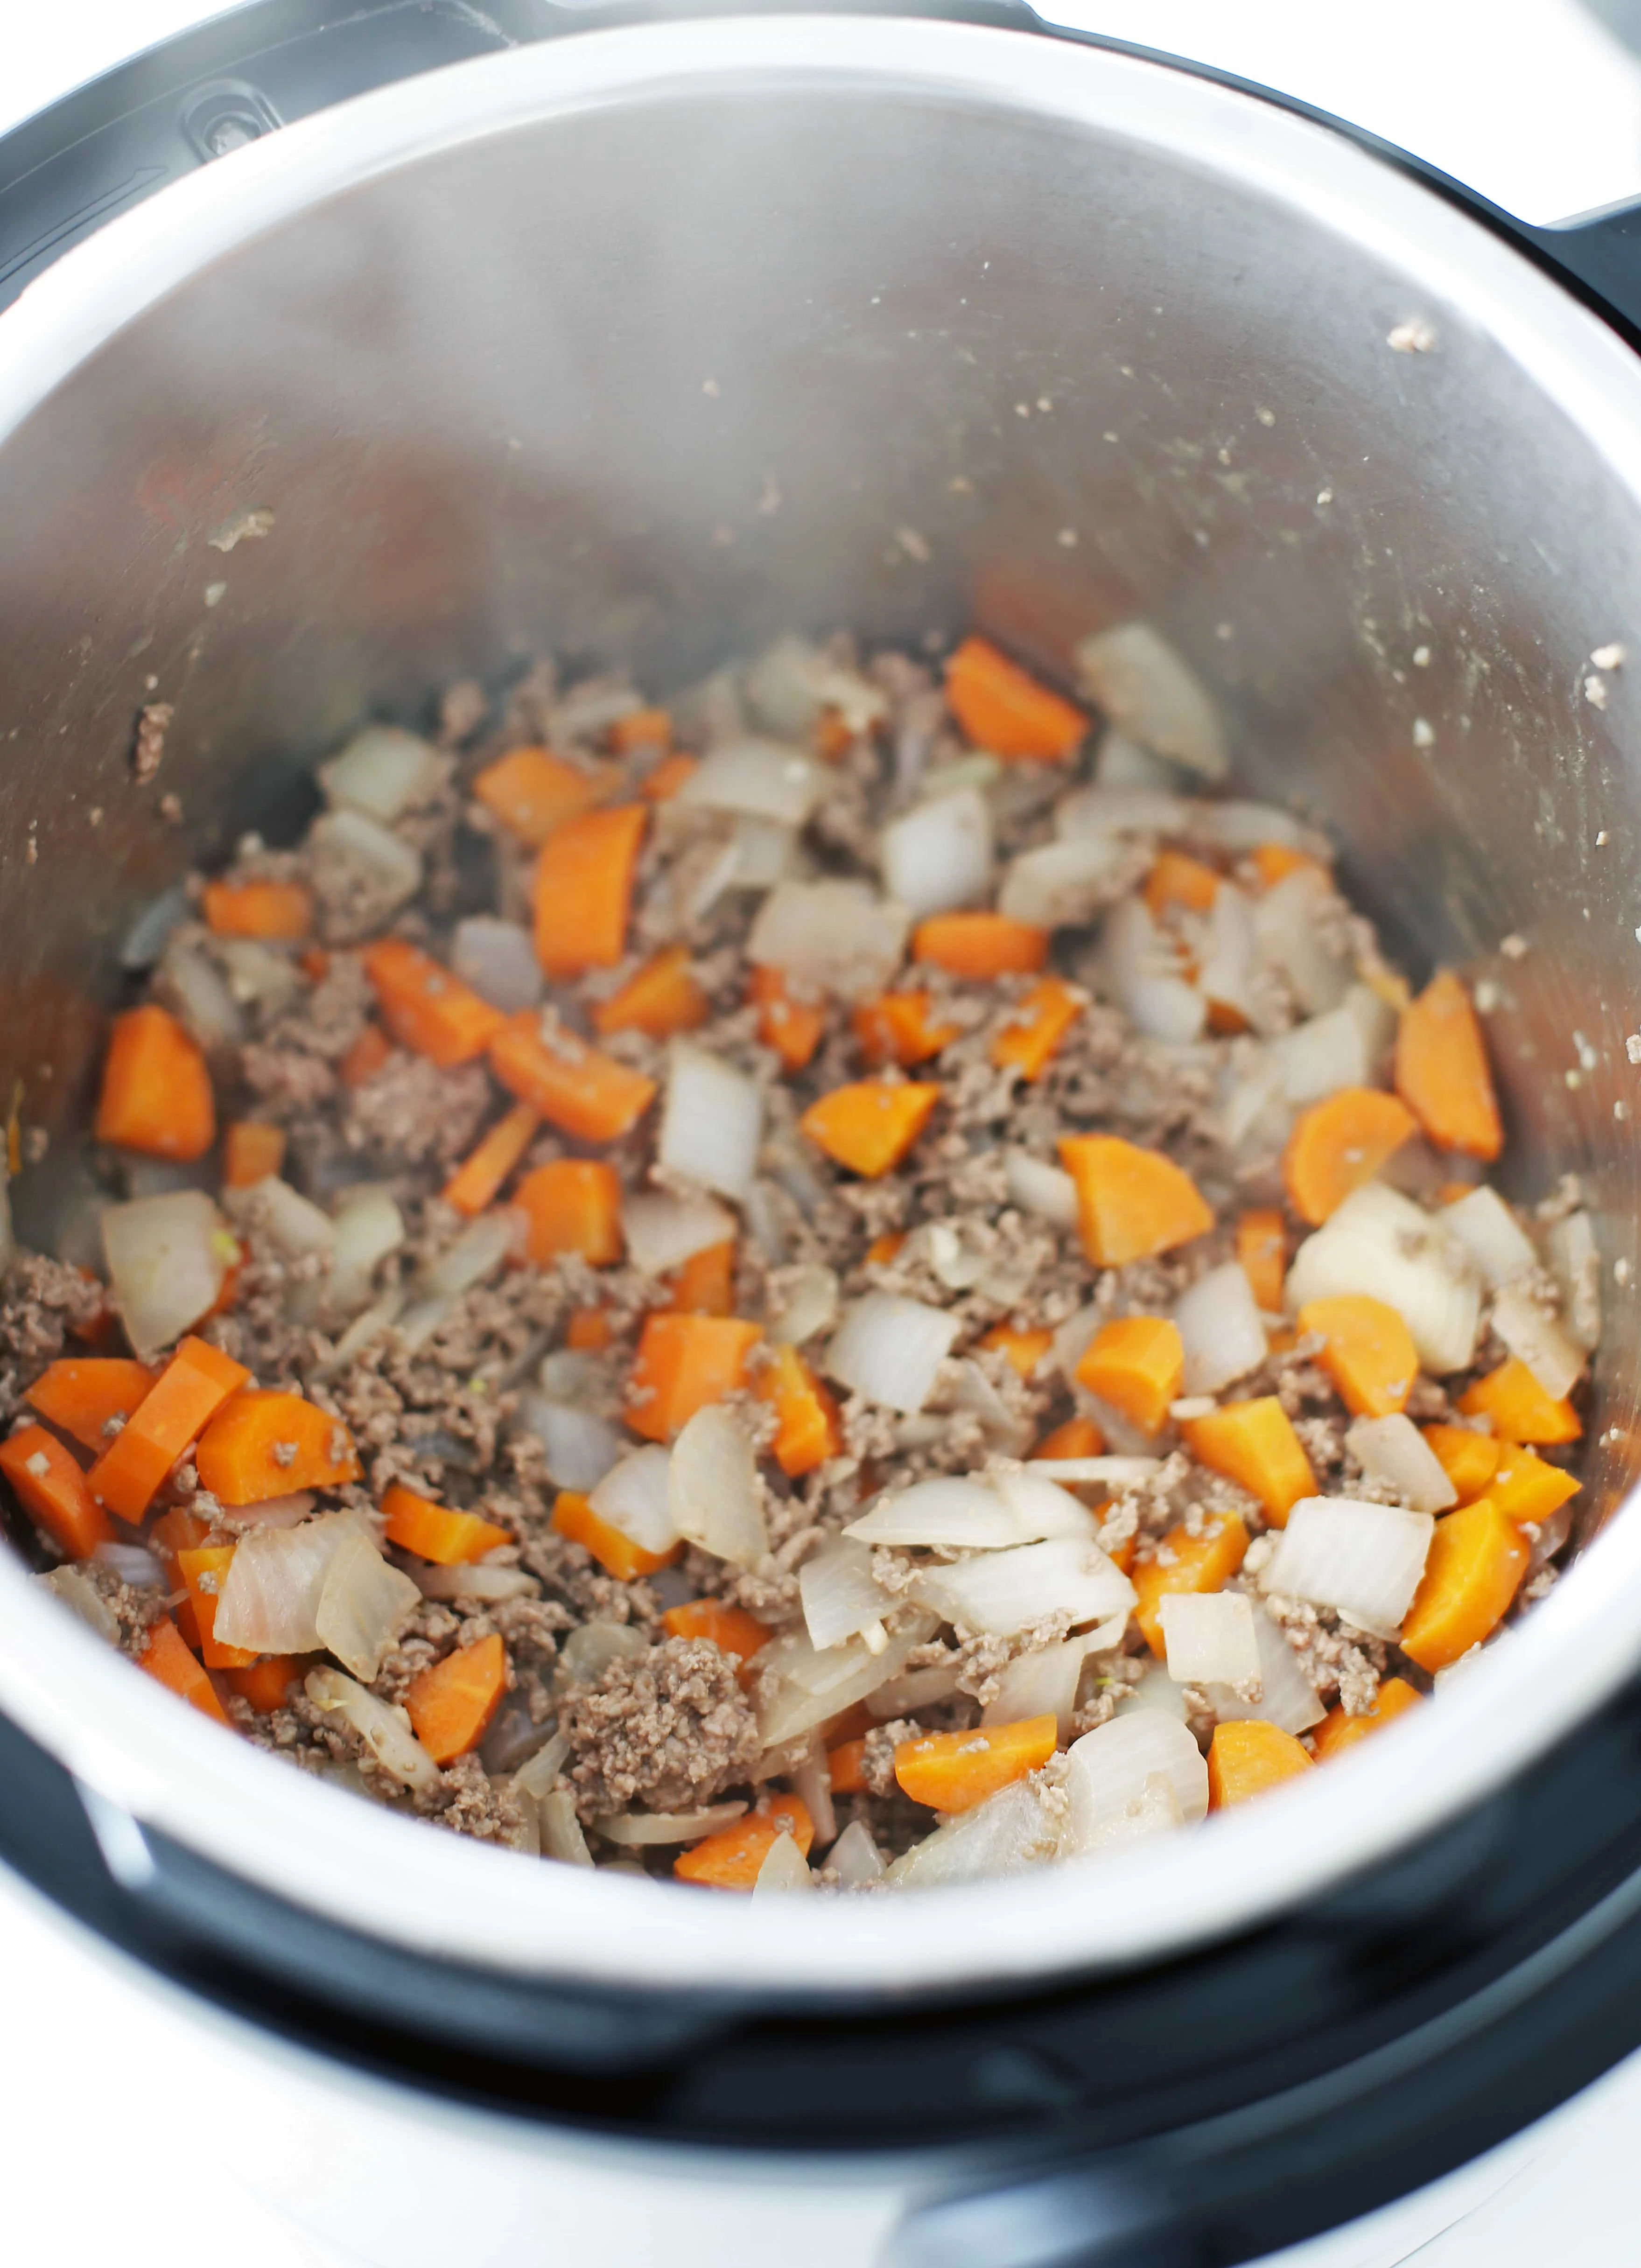 Sauteed vegetables and ground beef in the Instant Pot.